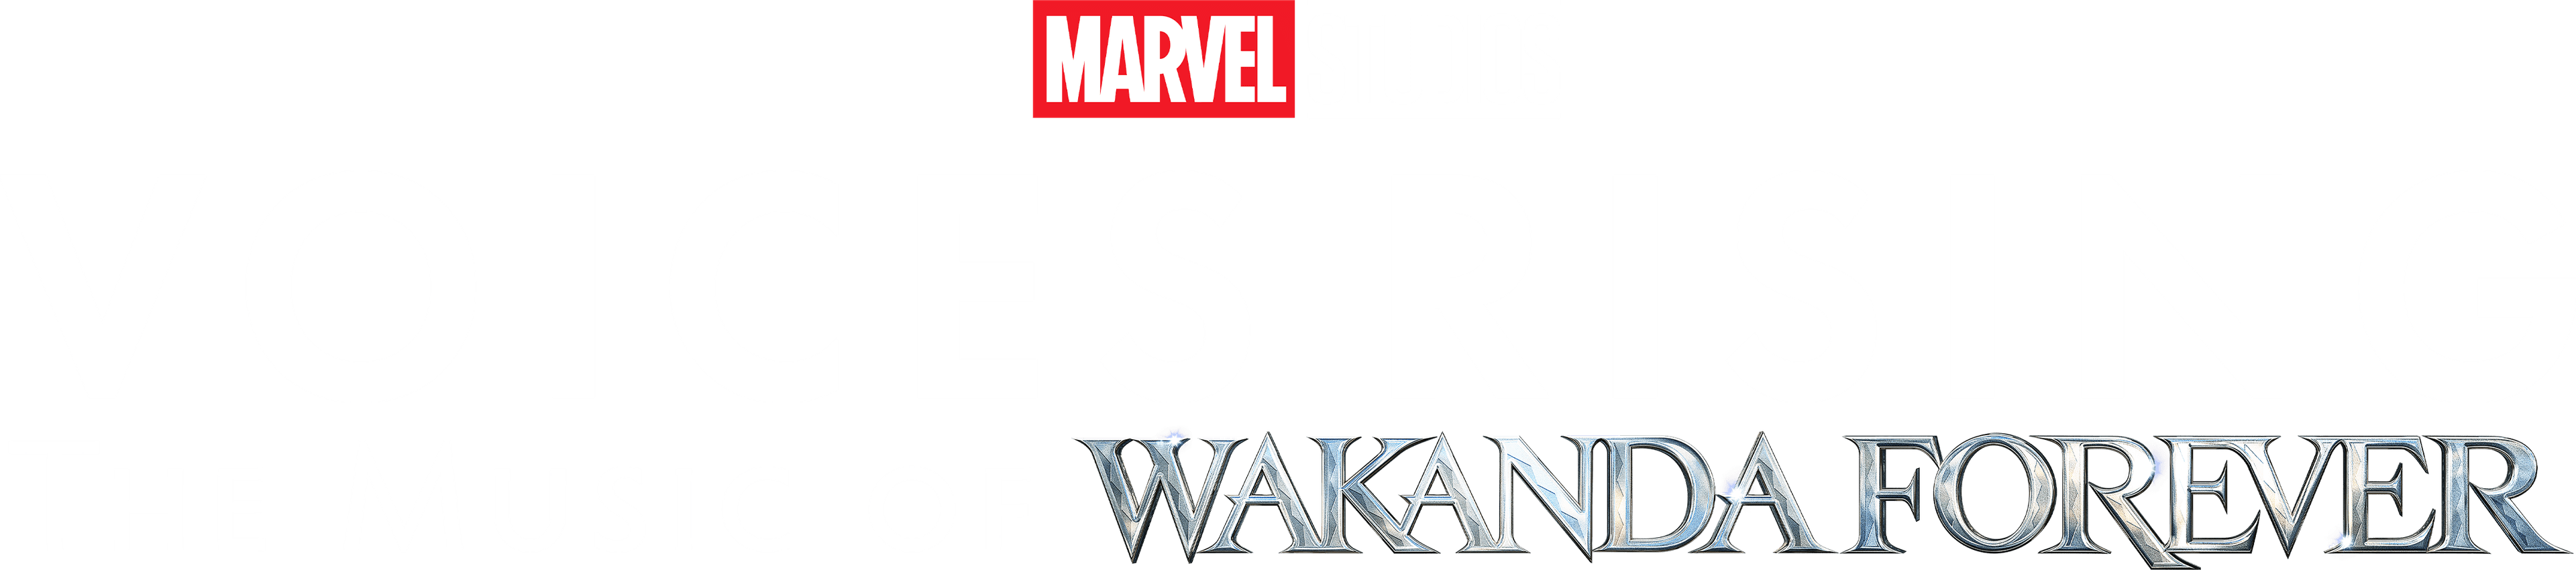 Voices Rising: The Music of Wakanda Forever logo